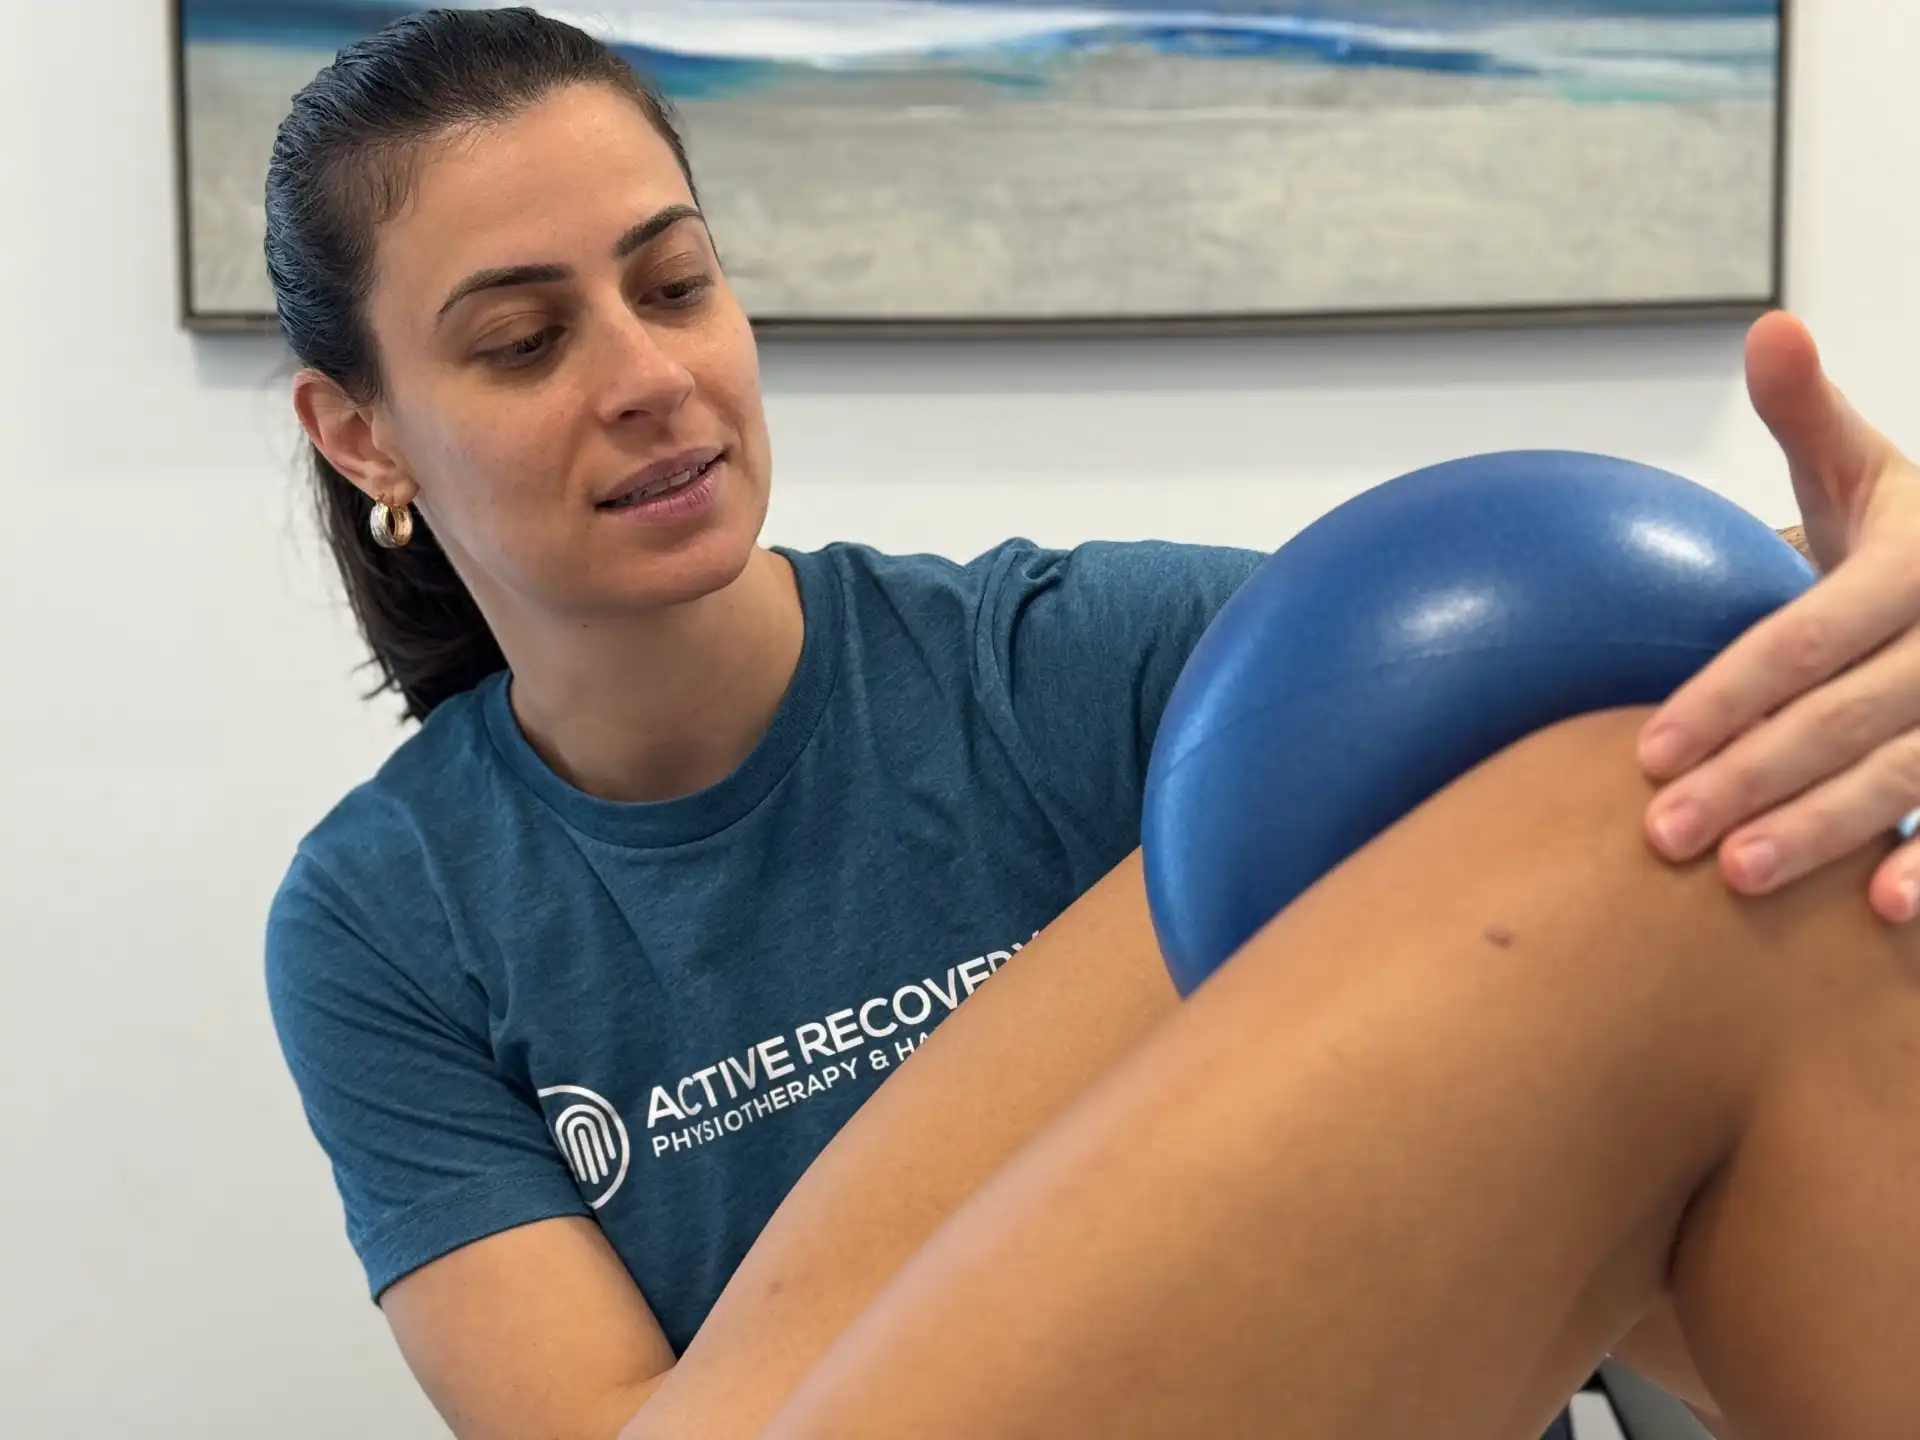 clinical pilates active recovery physiotherapy & hand therapy victoria bc